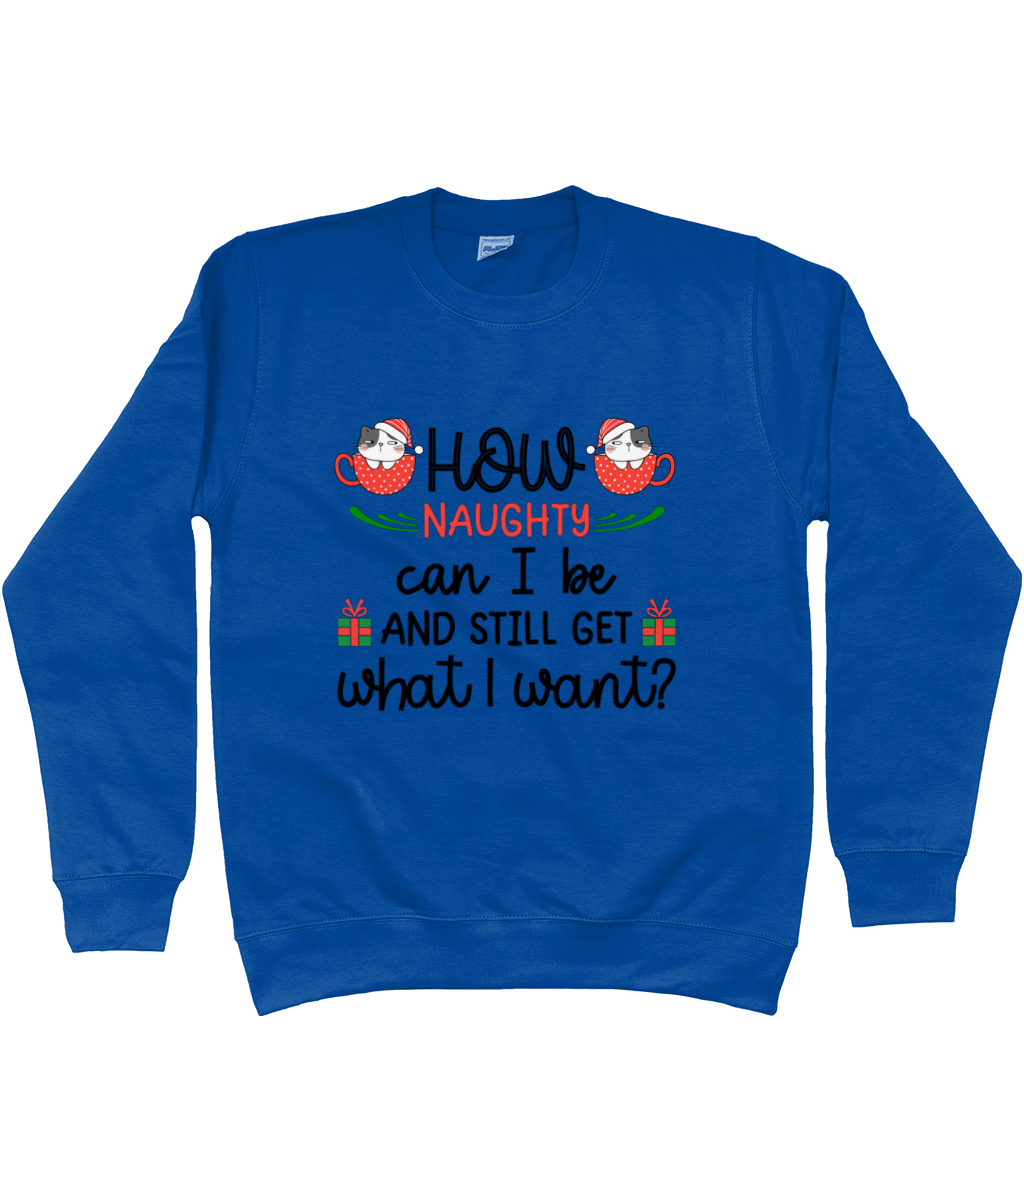 How Naughty Can I Be And Still Get What I Want - Christmas Sweatshirt